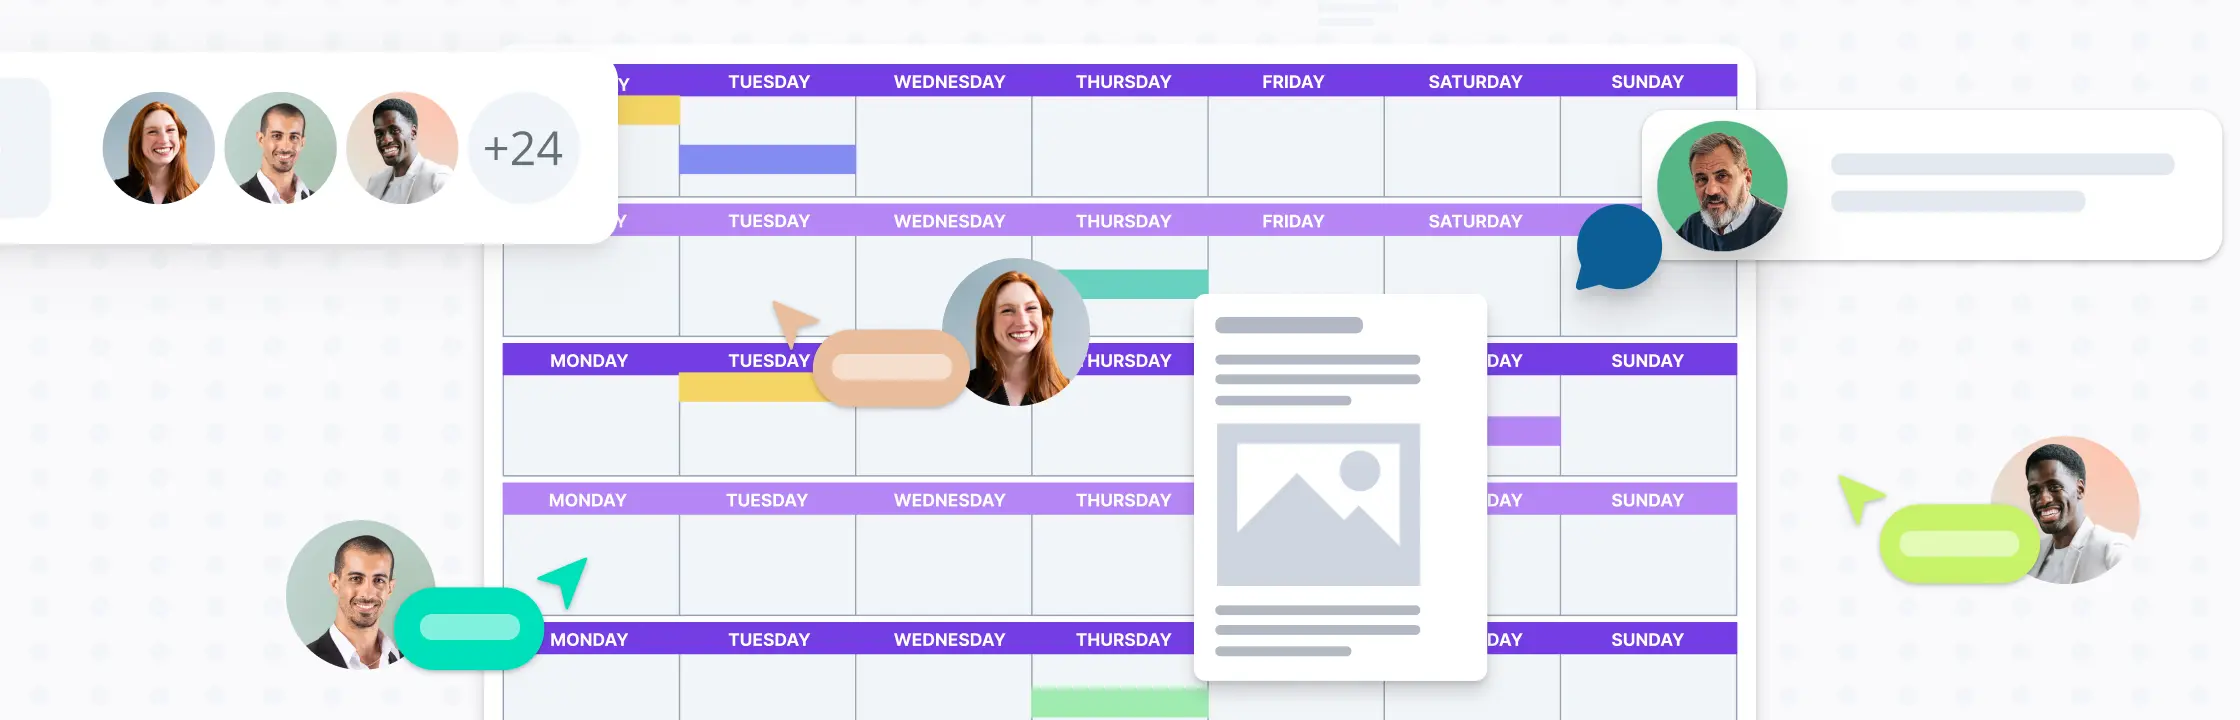 How to Plan Your Week Like a Pro with a Weekly Schedule Template